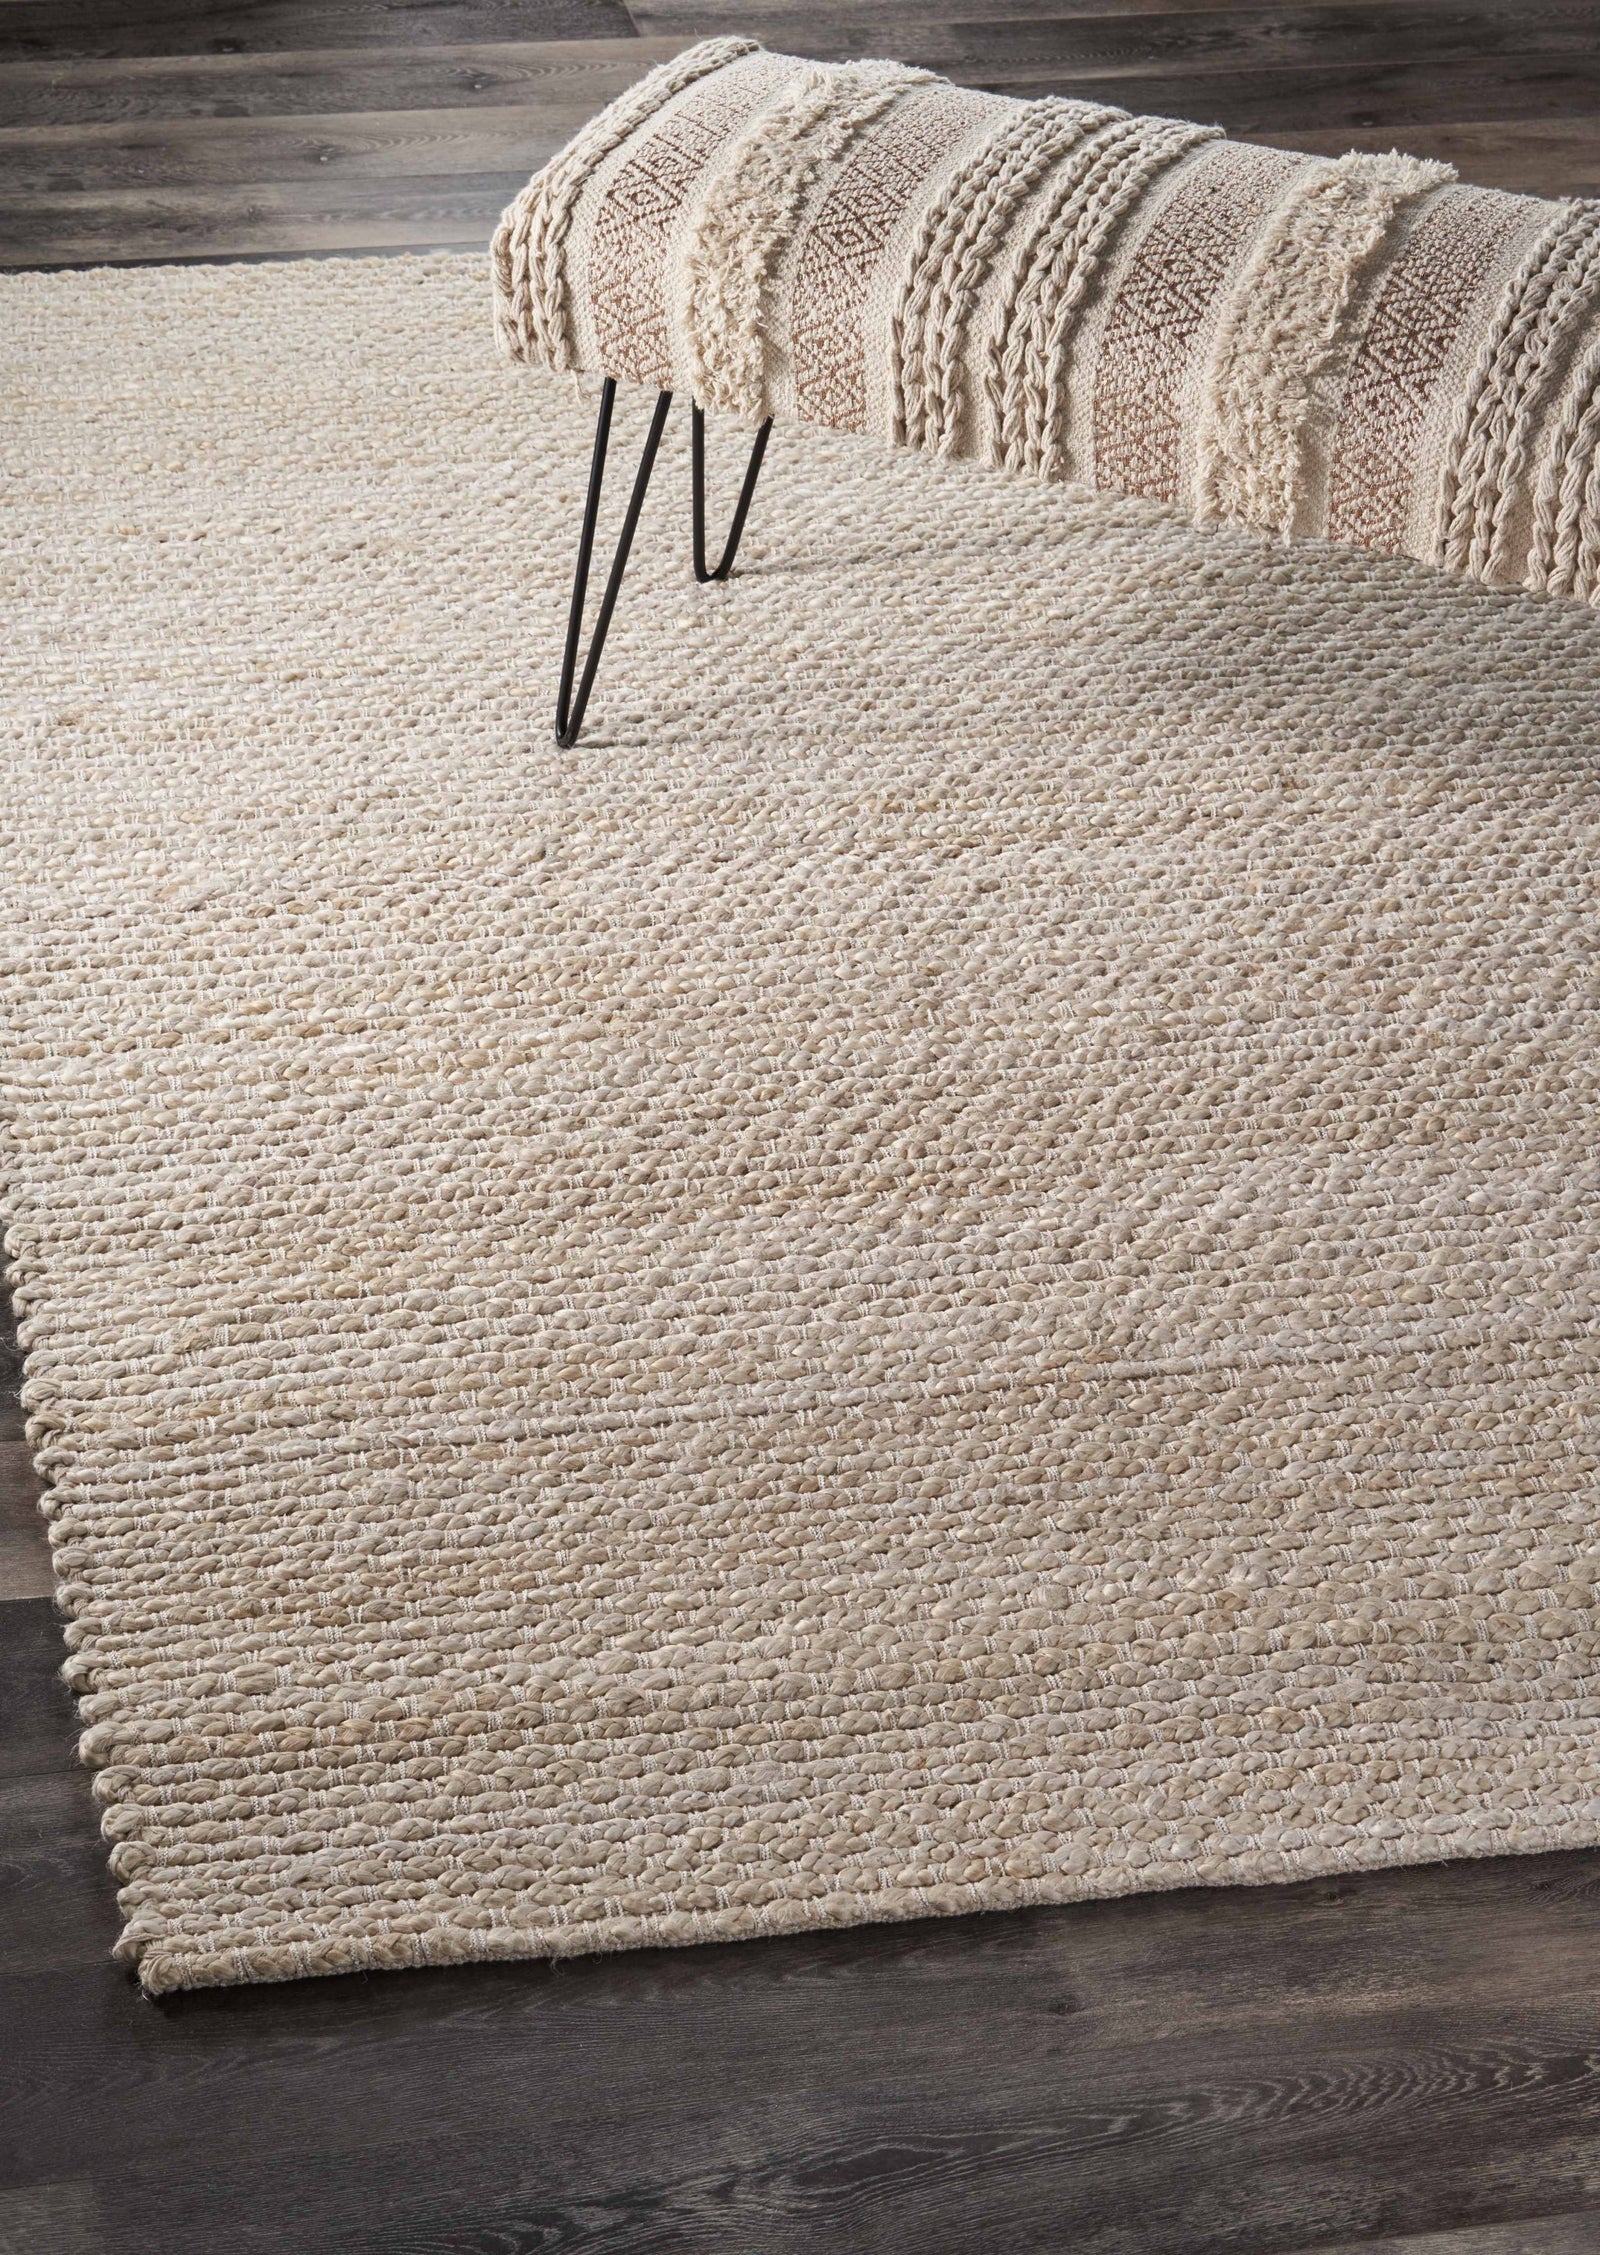 5’ x 8’ Natural Bleached Contemporary Area Rug